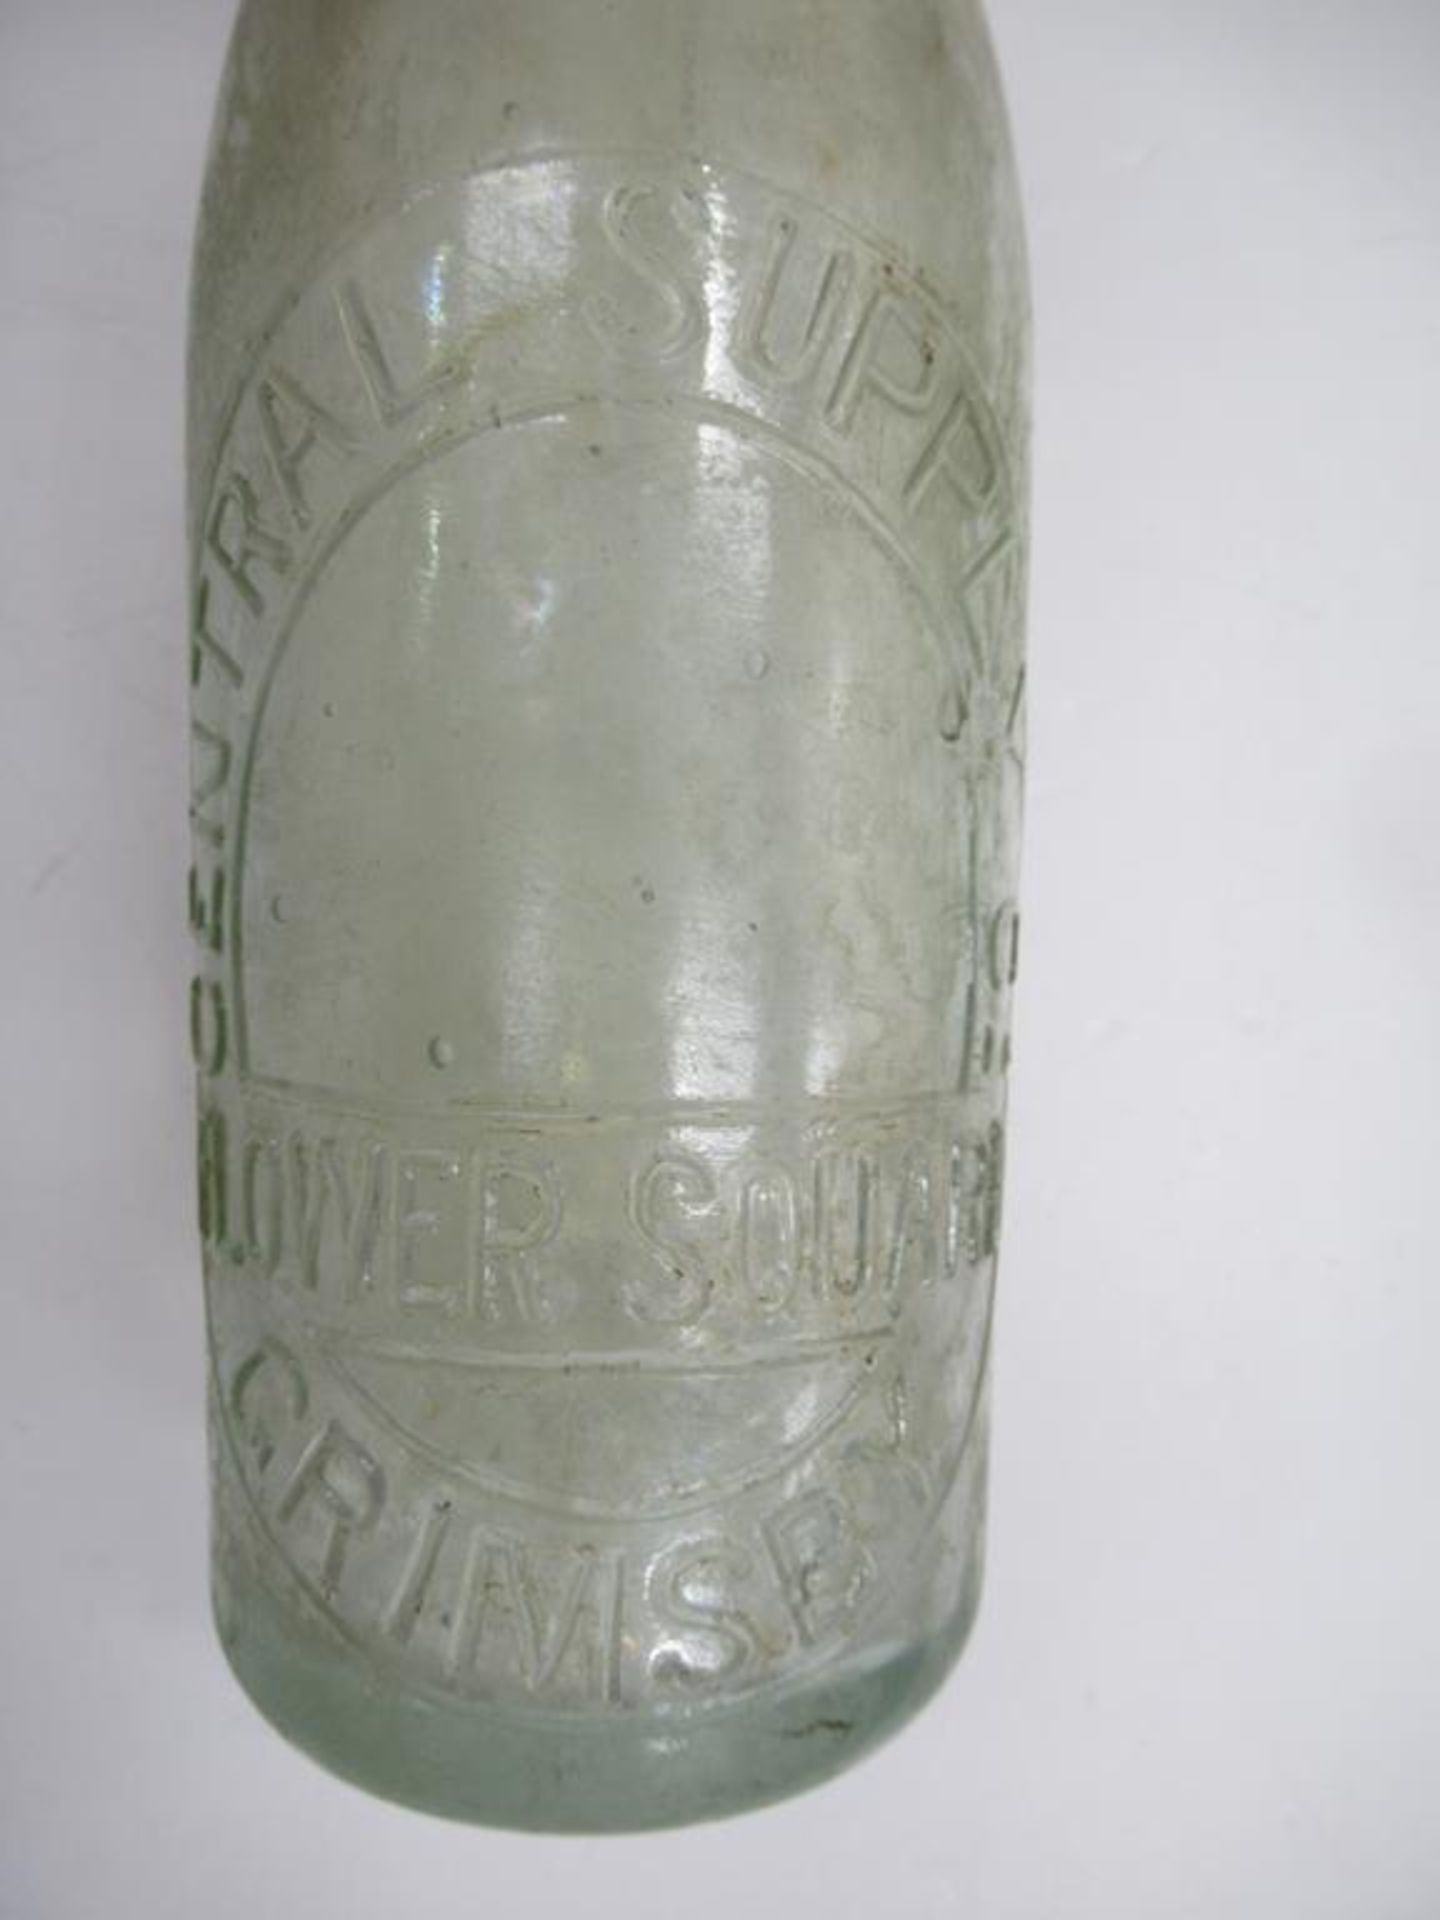 4x Grimsby Central Supply Co (2), Warwicks Cash Stores (1) and H.J. Curry bottles - Image 12 of 13